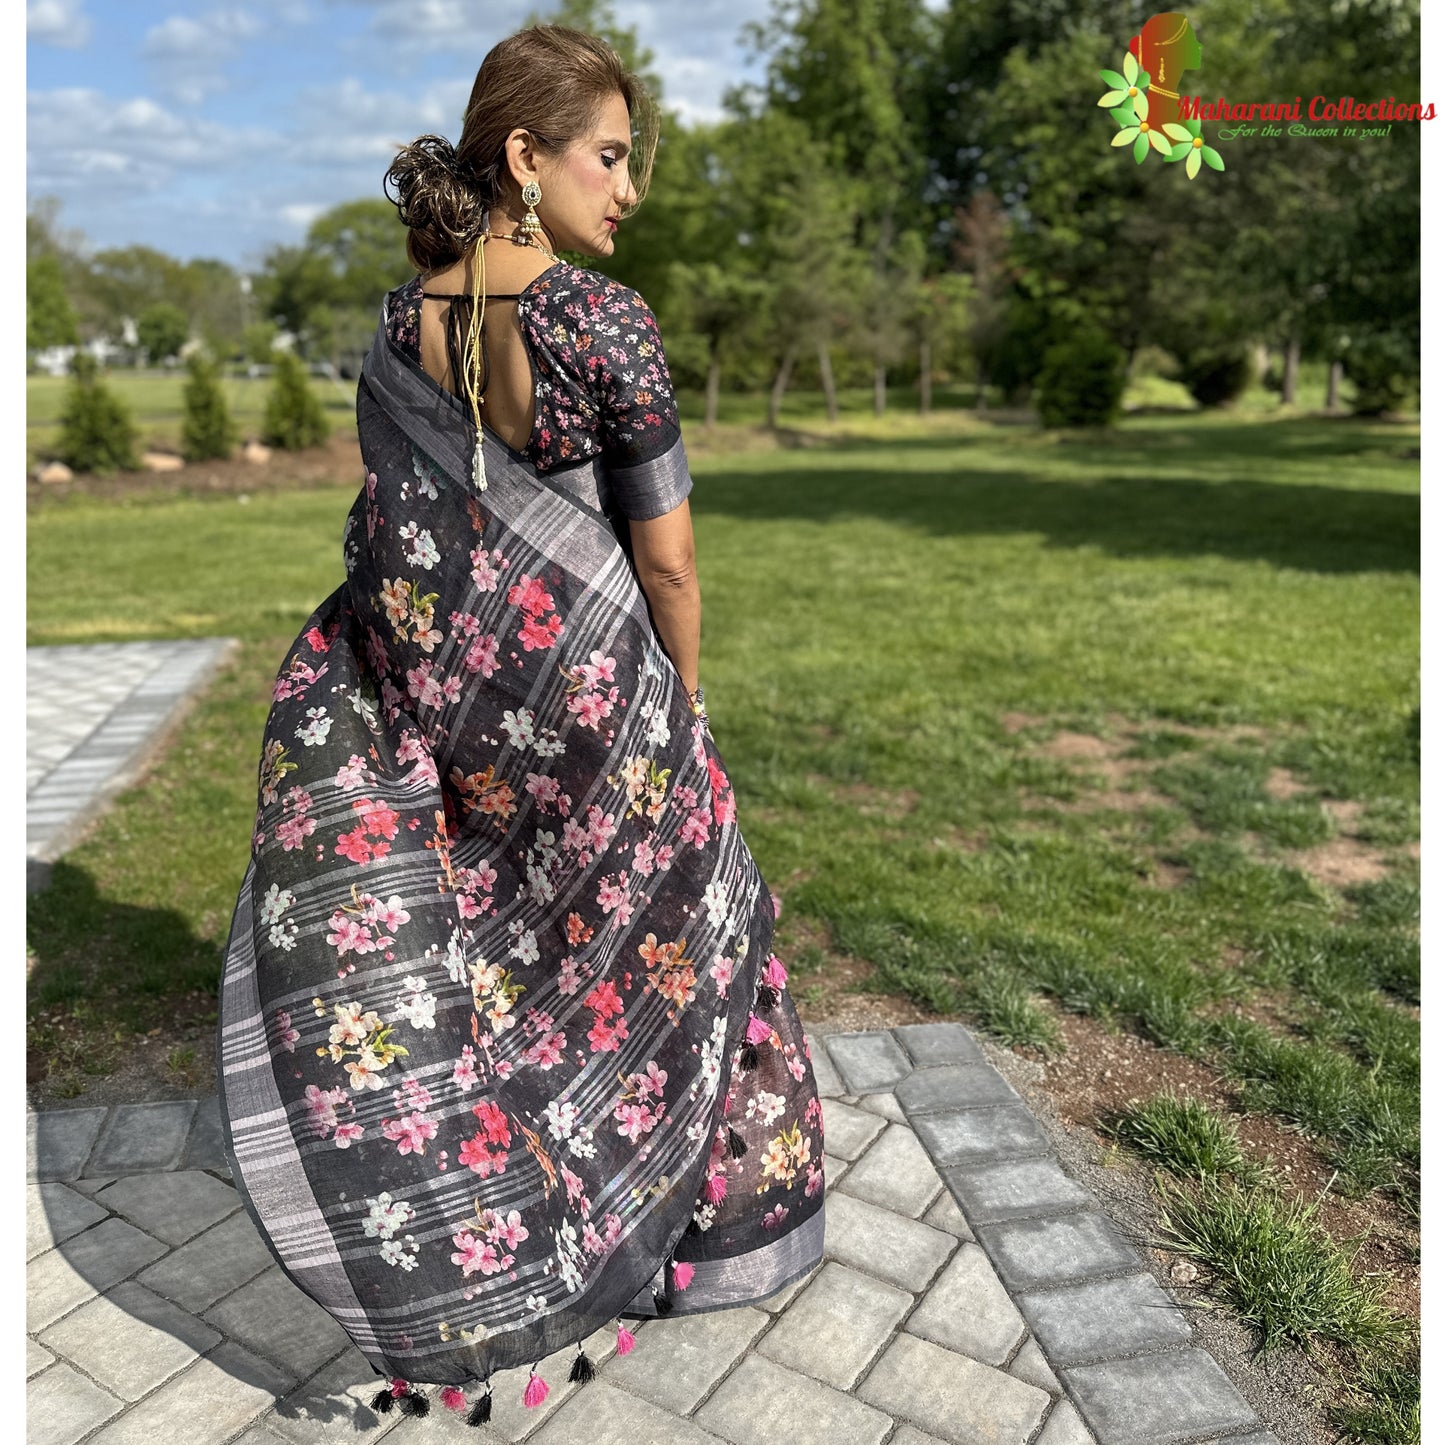 Maharani's Simple Elegance Matka Silk Saree - Floral Grey (with stitched blouse and petticoat)